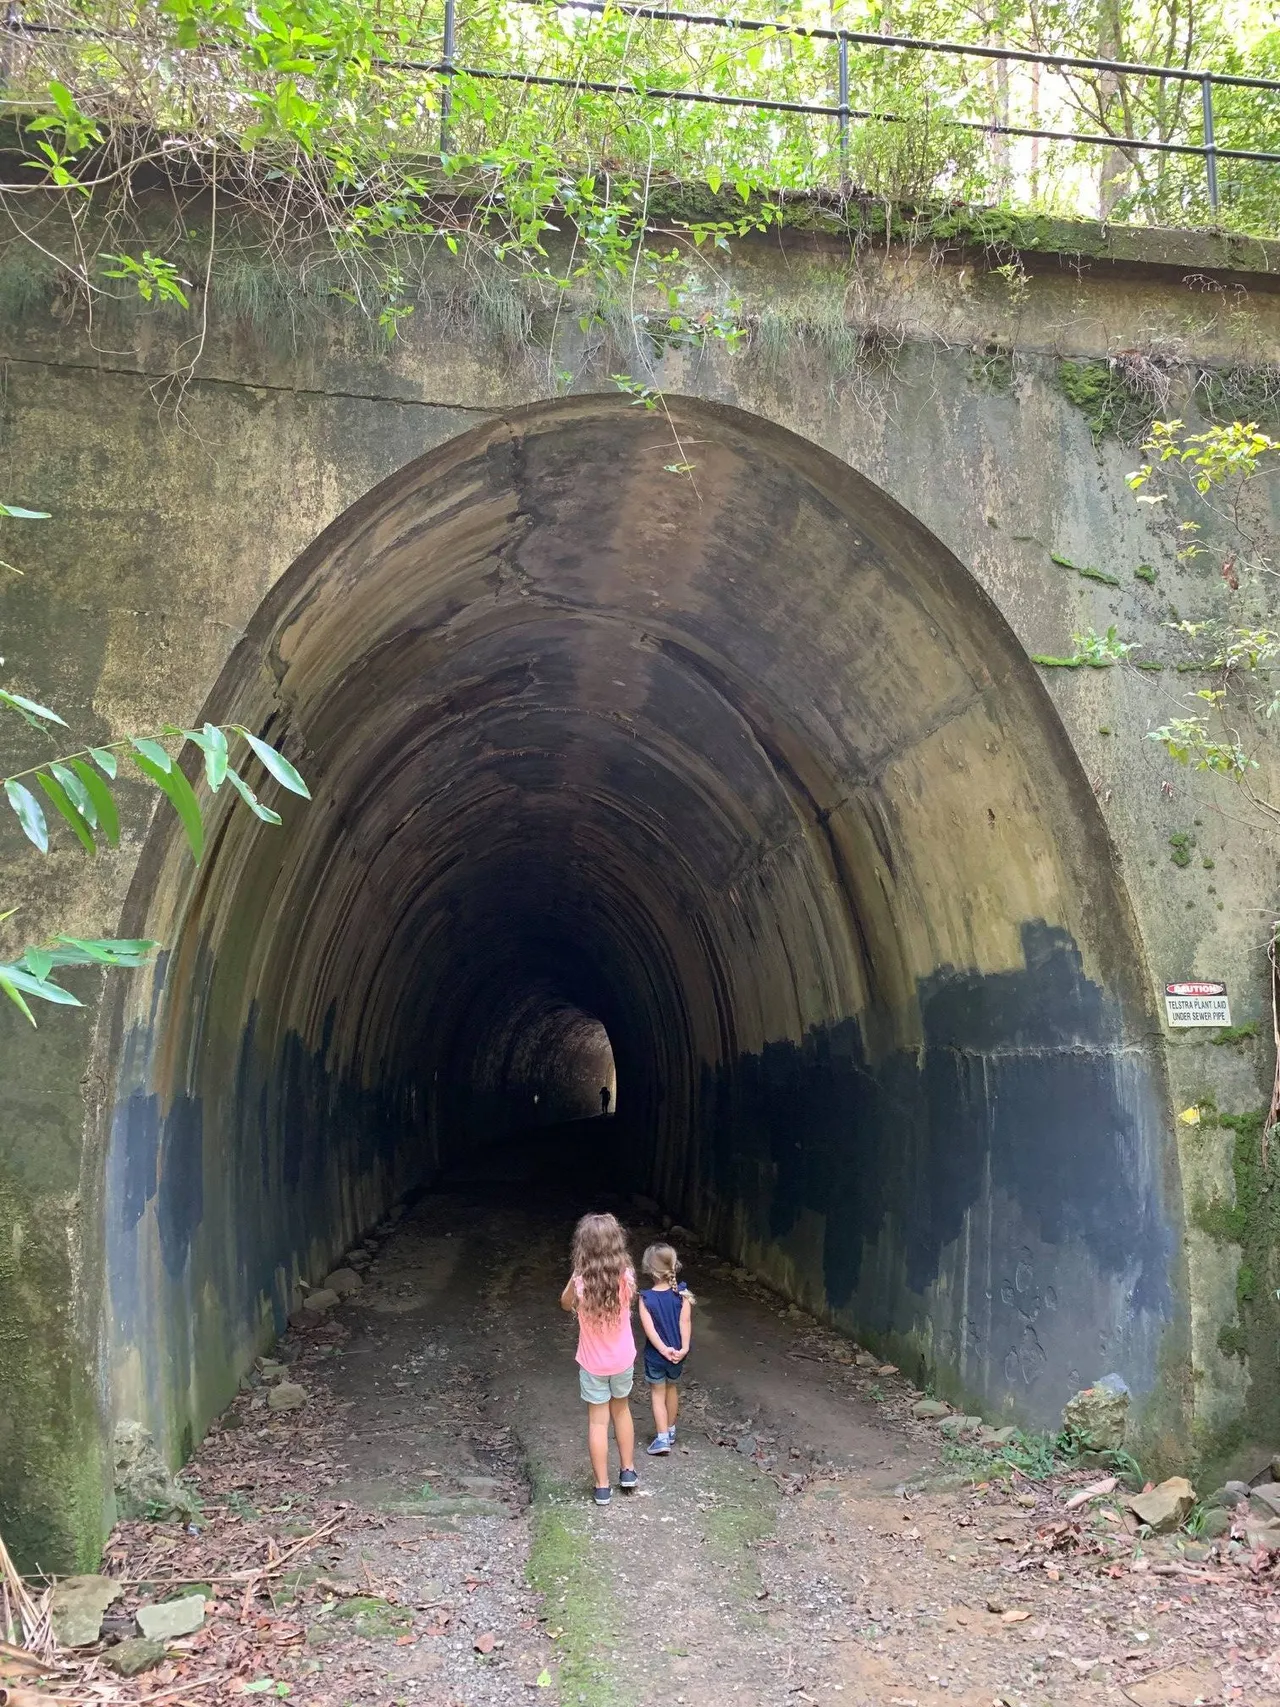 Dularcha National Park – Tunnel Track